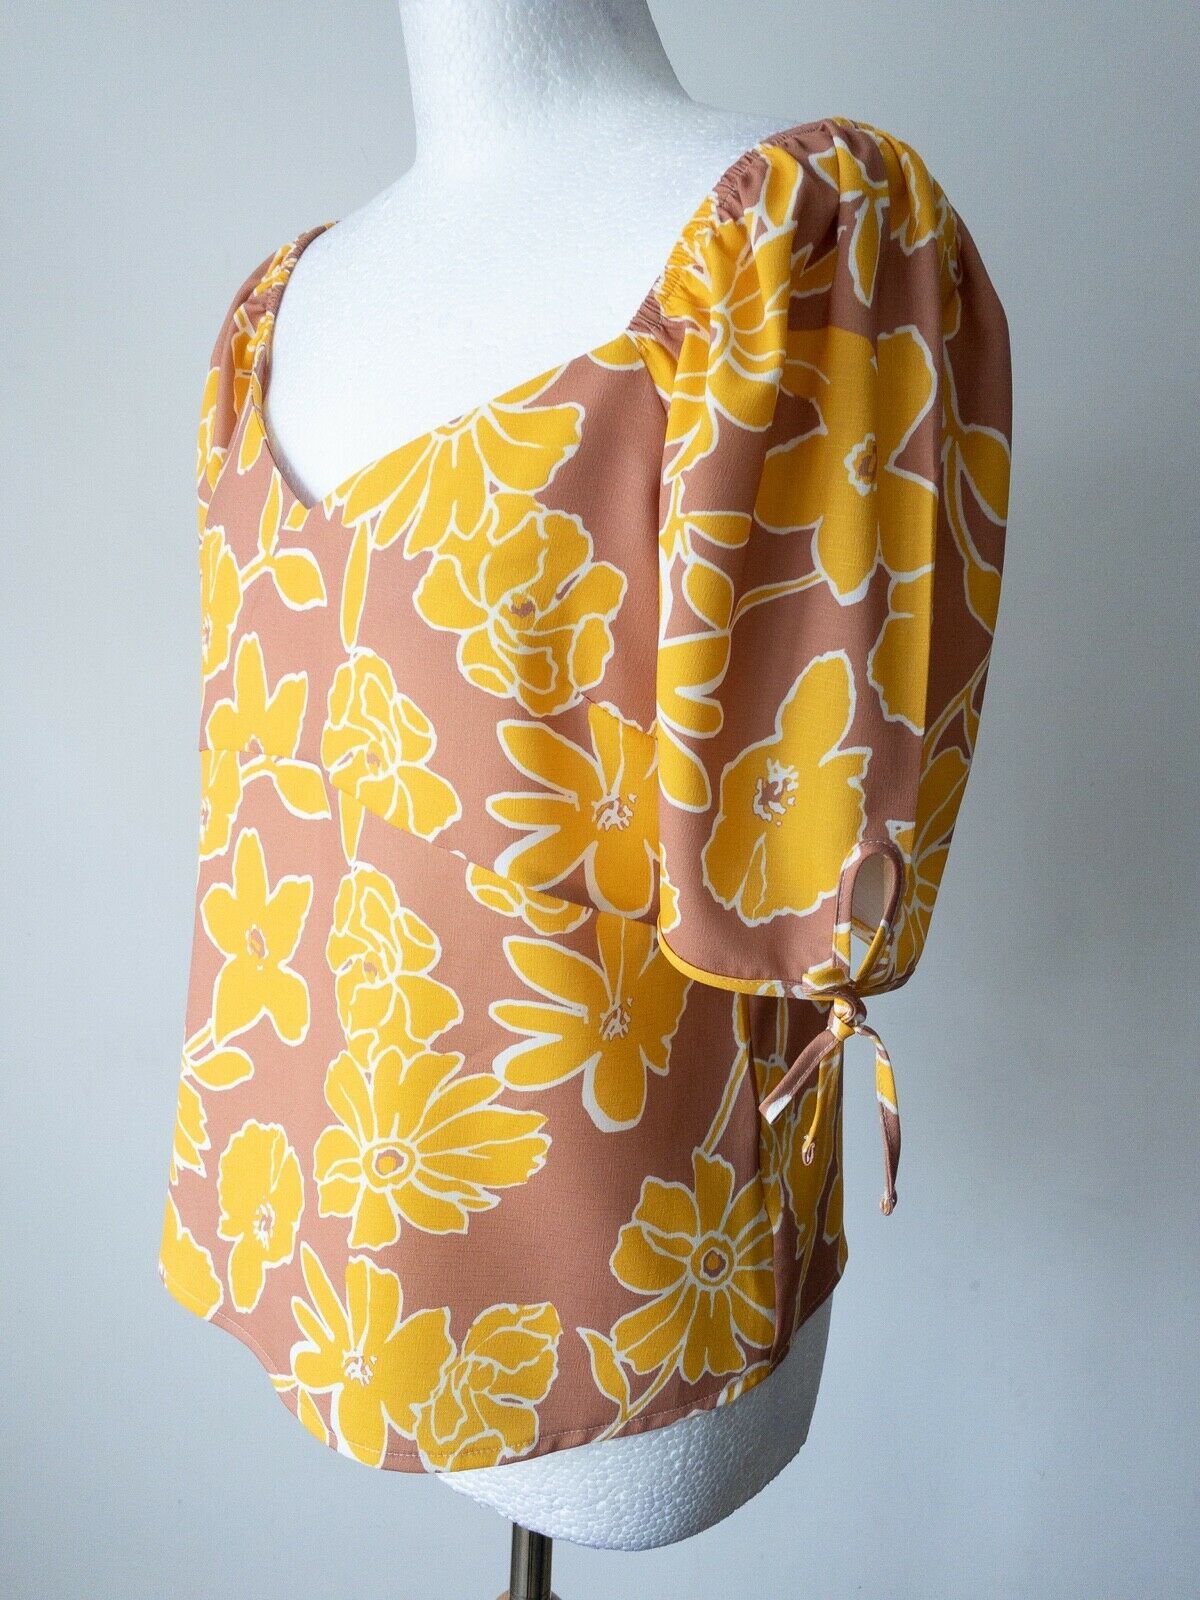 Yellow and Brown Floral Blouse V-Neck Size 10 Vintage Retro Print - Beagle Boutique Fashion Outlet